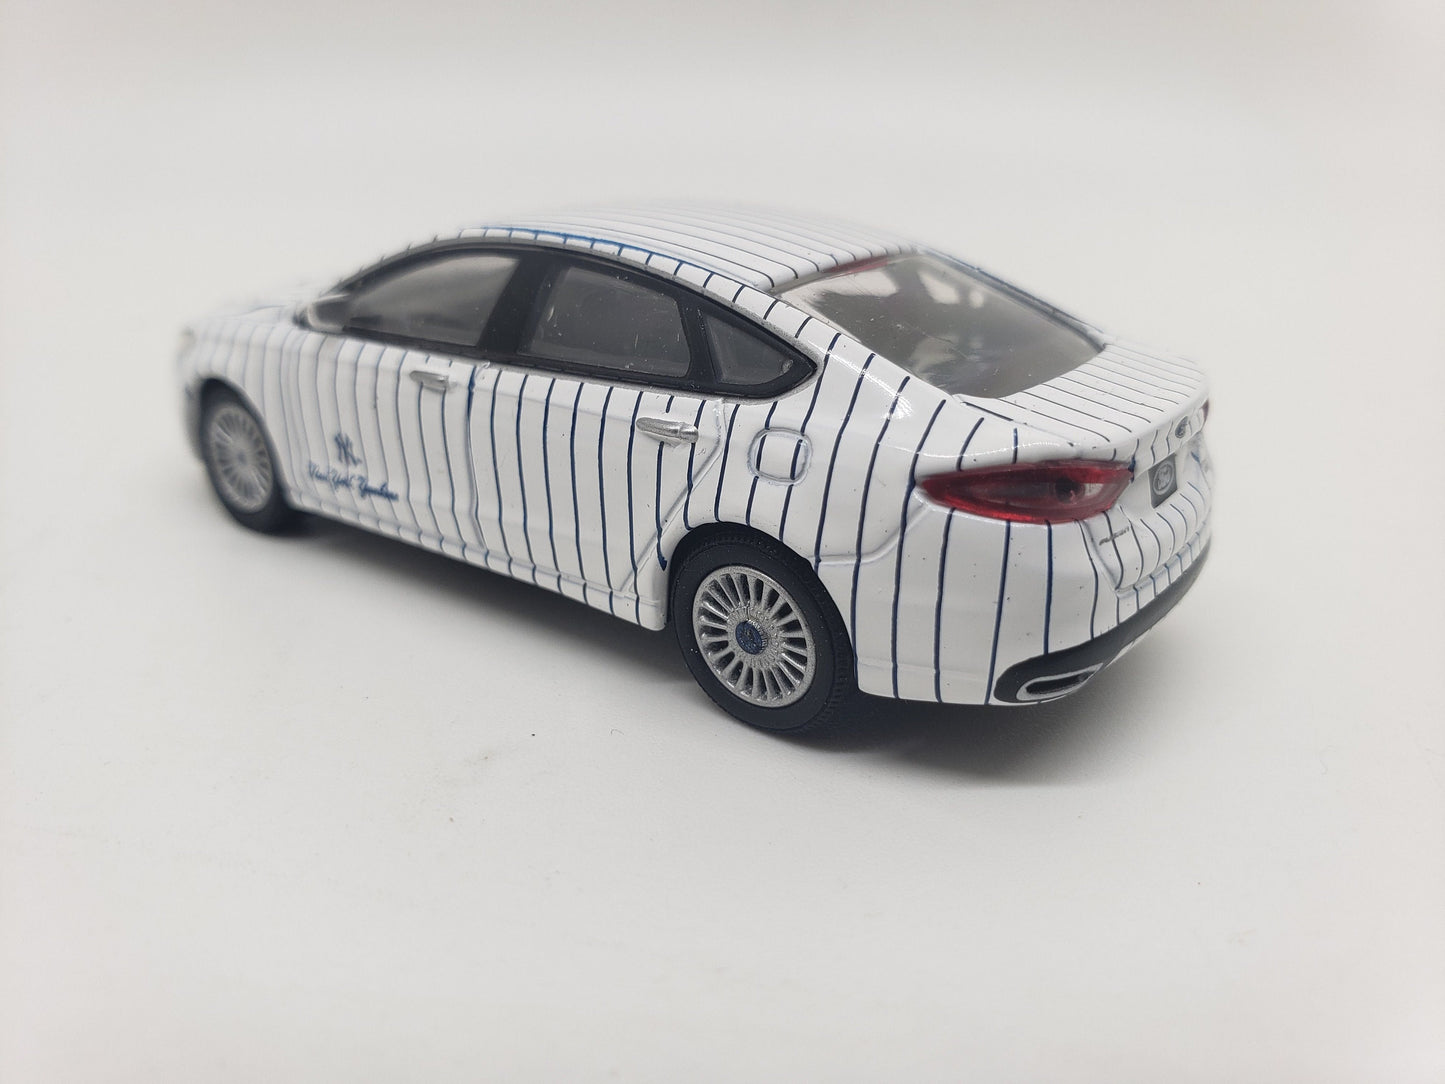 Greenlight Ford Fusion New York Yankees Perfect Birthday Gift Miniature Collectable Model Toy Car